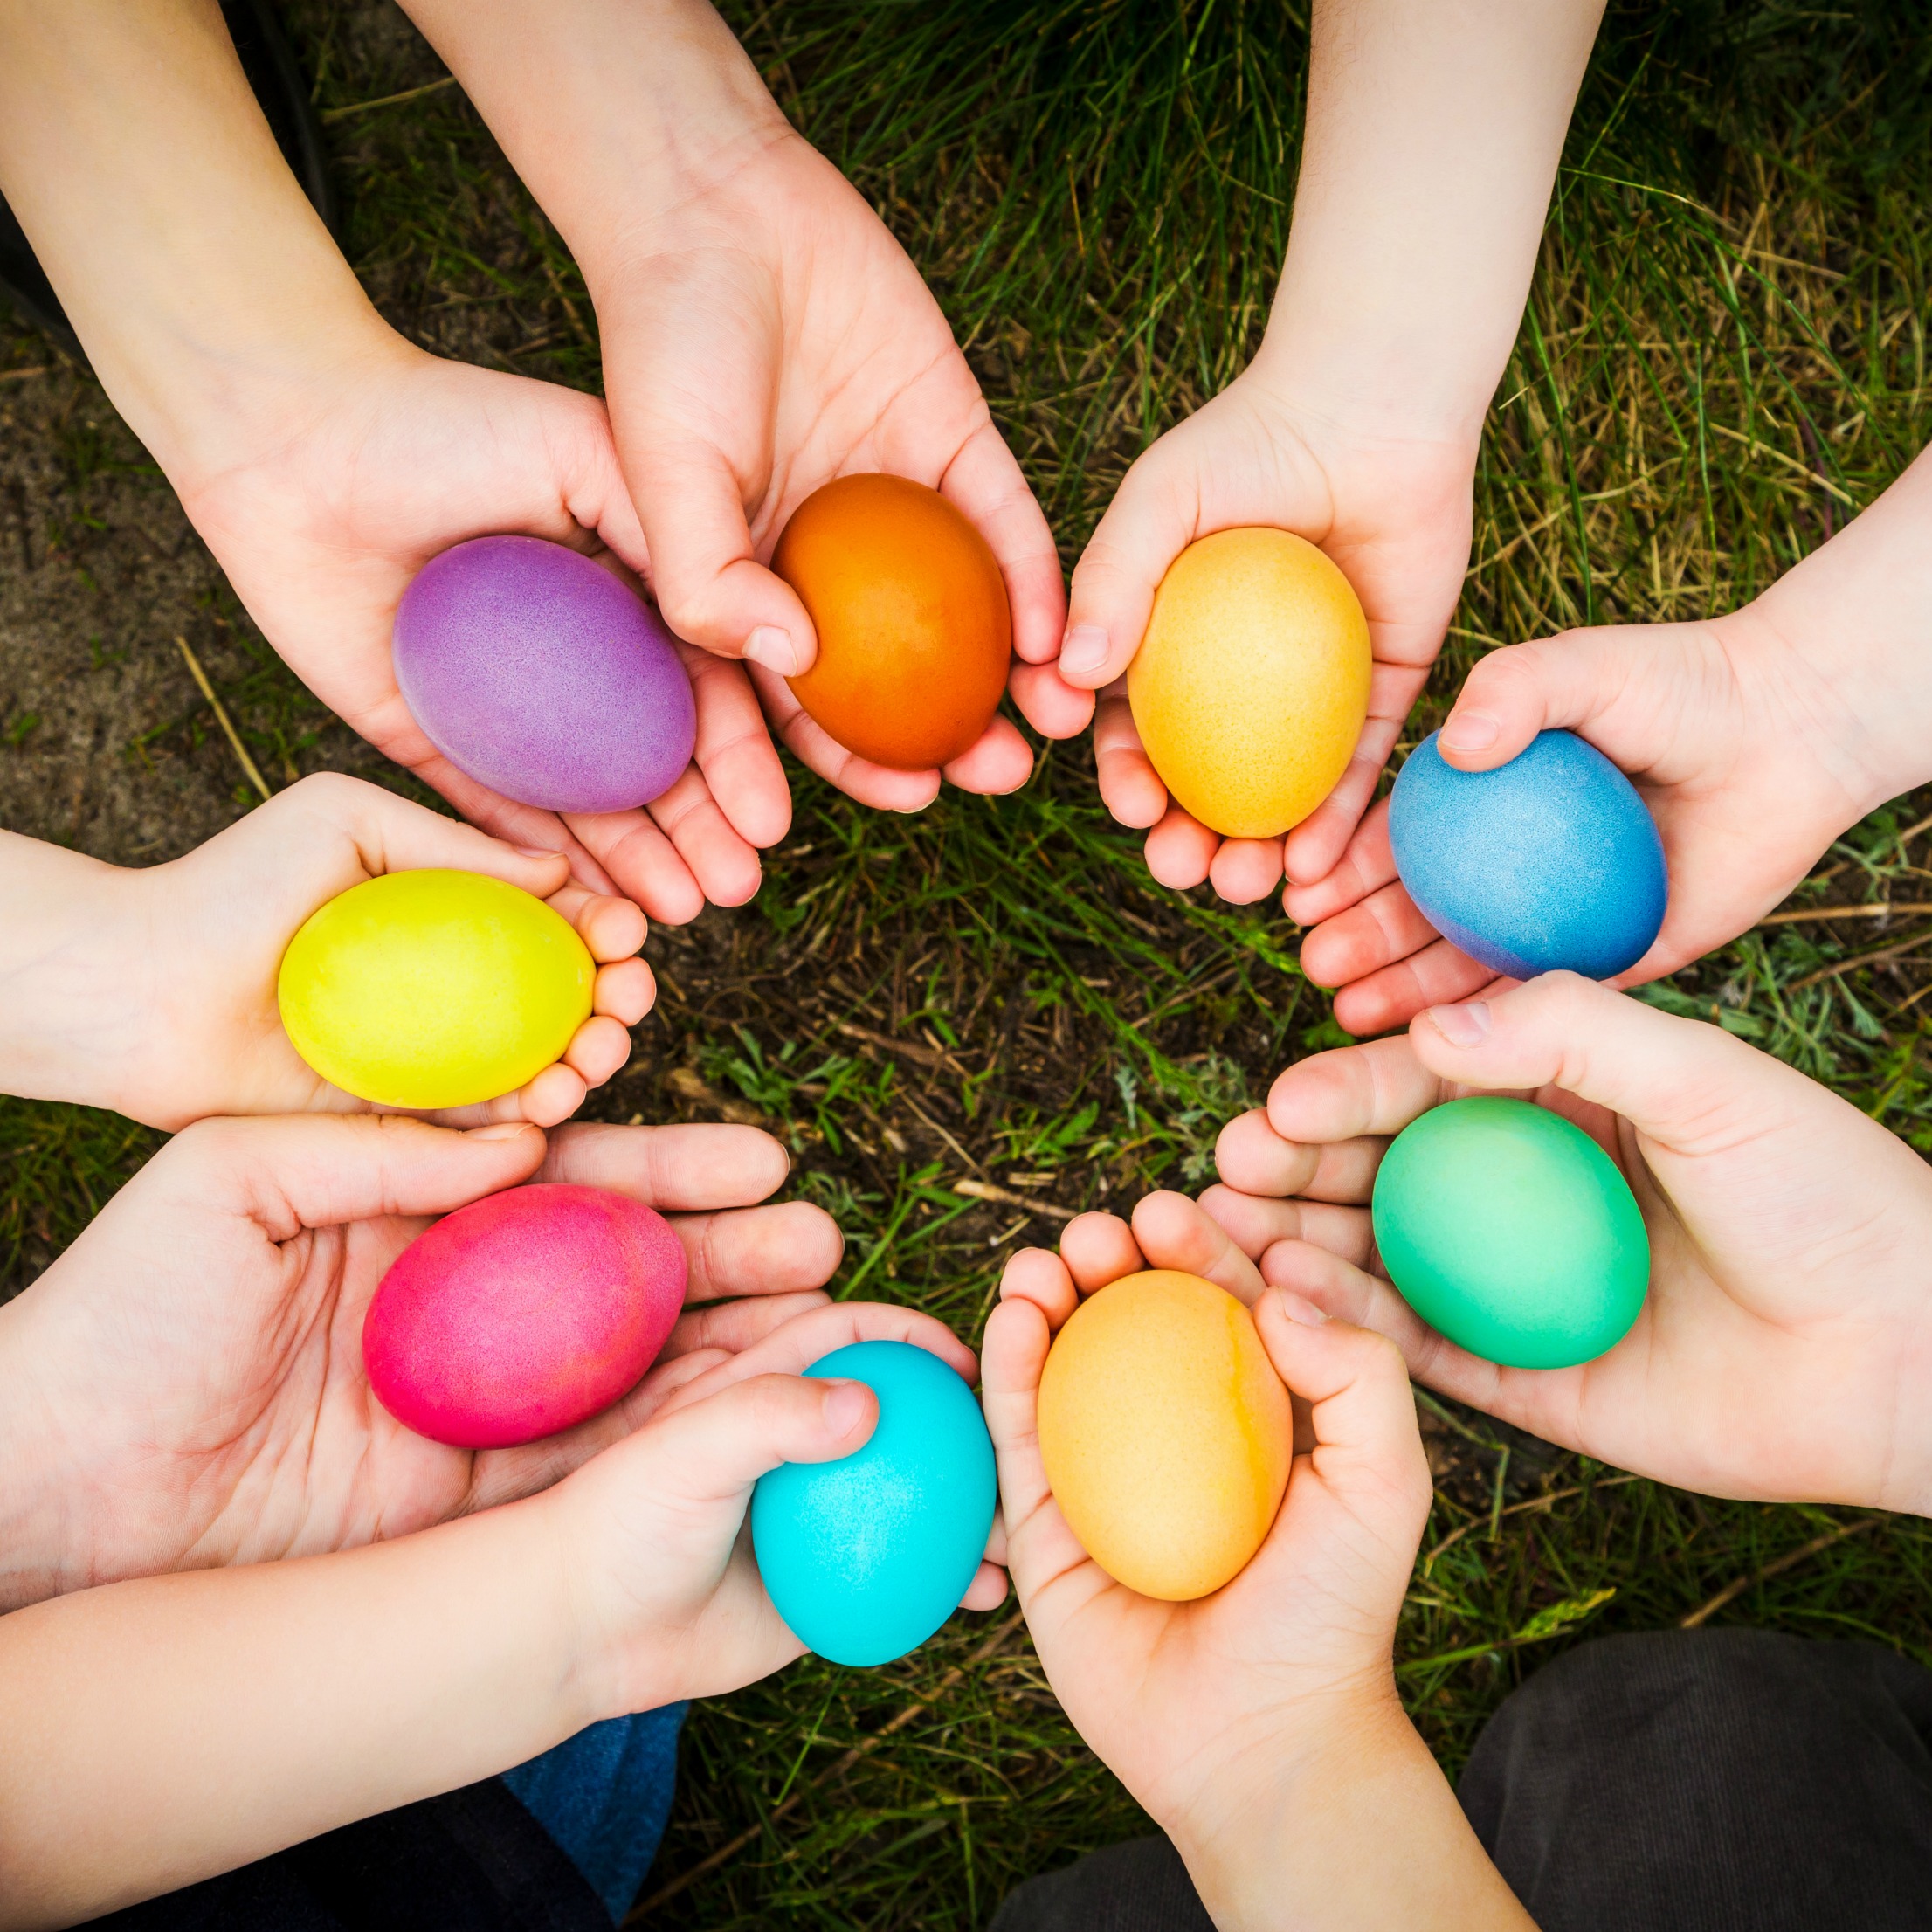 5 Fun Ways to Make Easter Extra Special